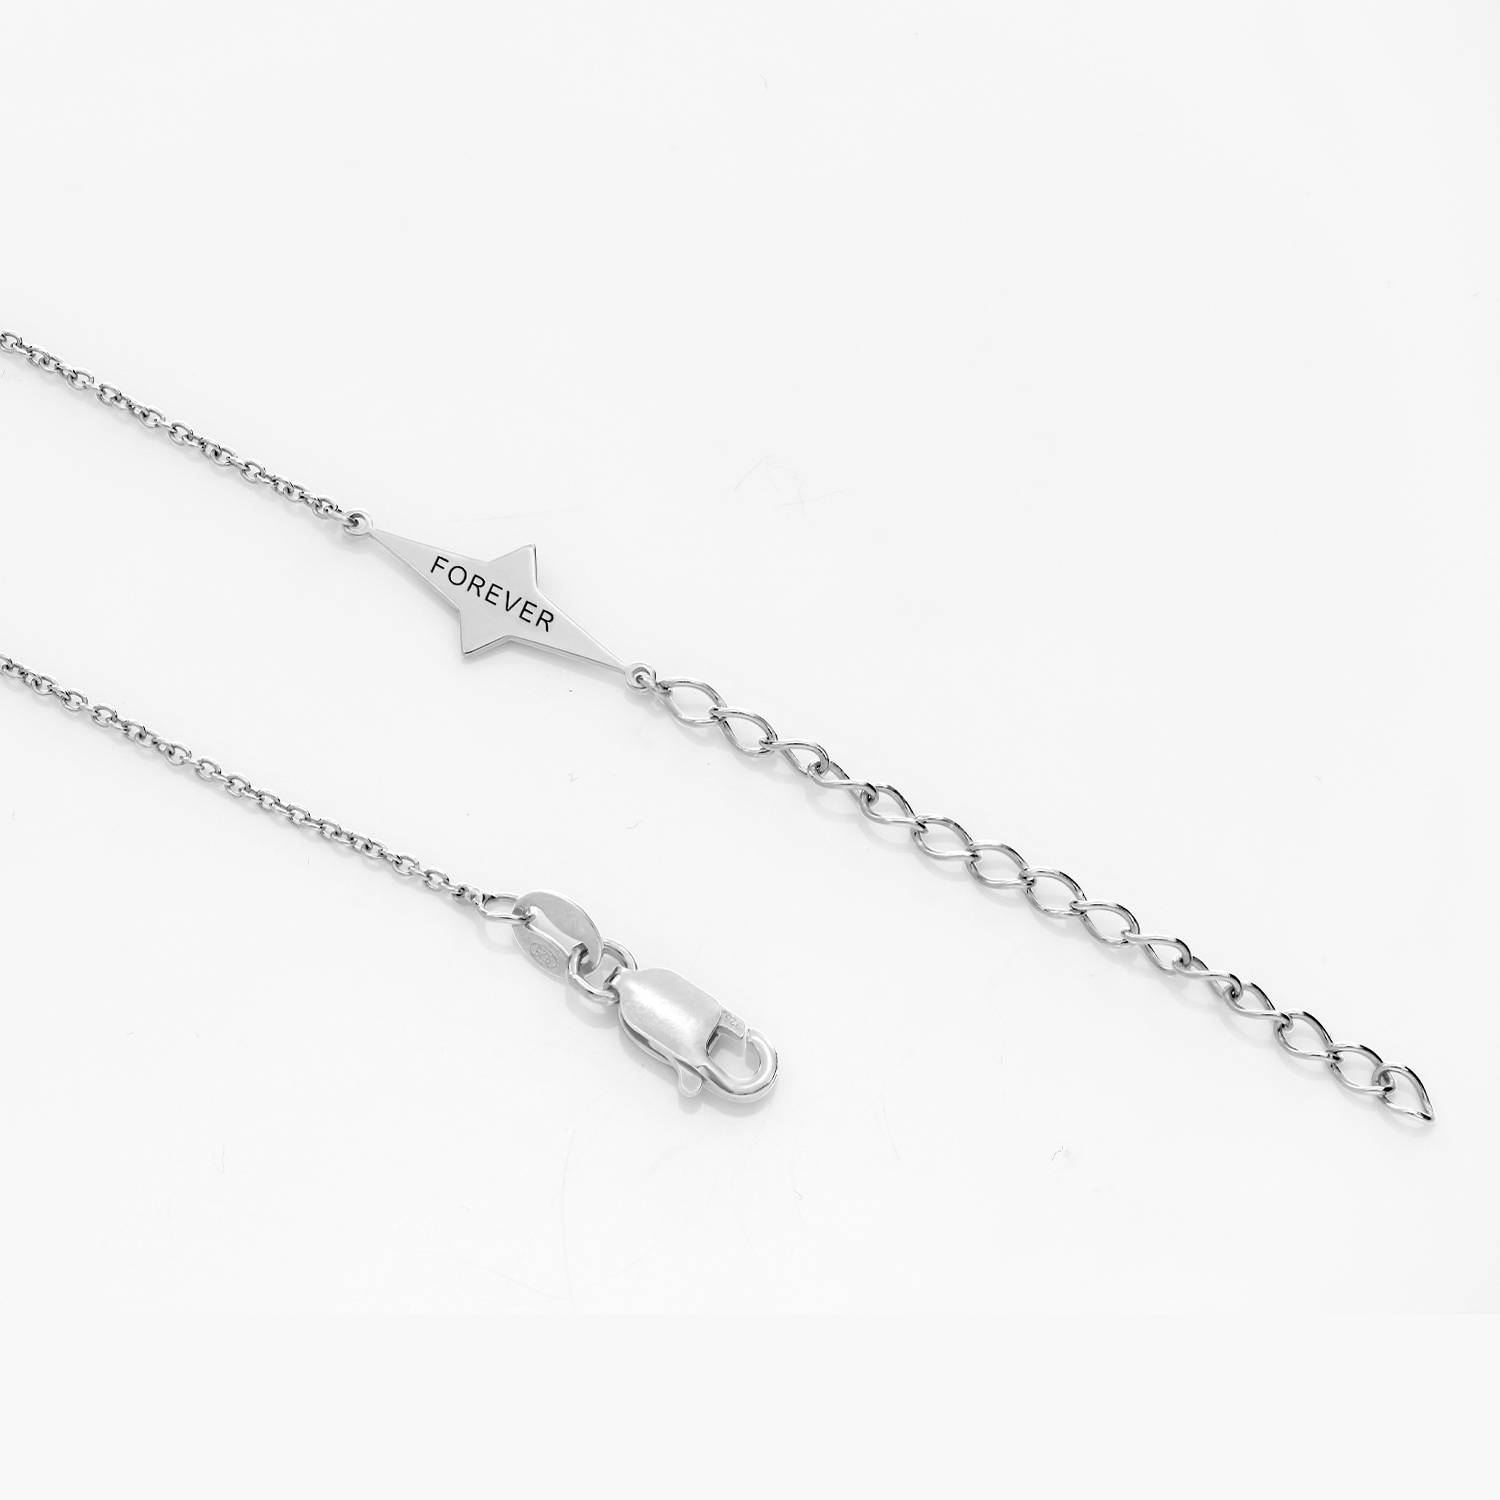 Northern Star Necklace with engraving - Silver-3 product photo